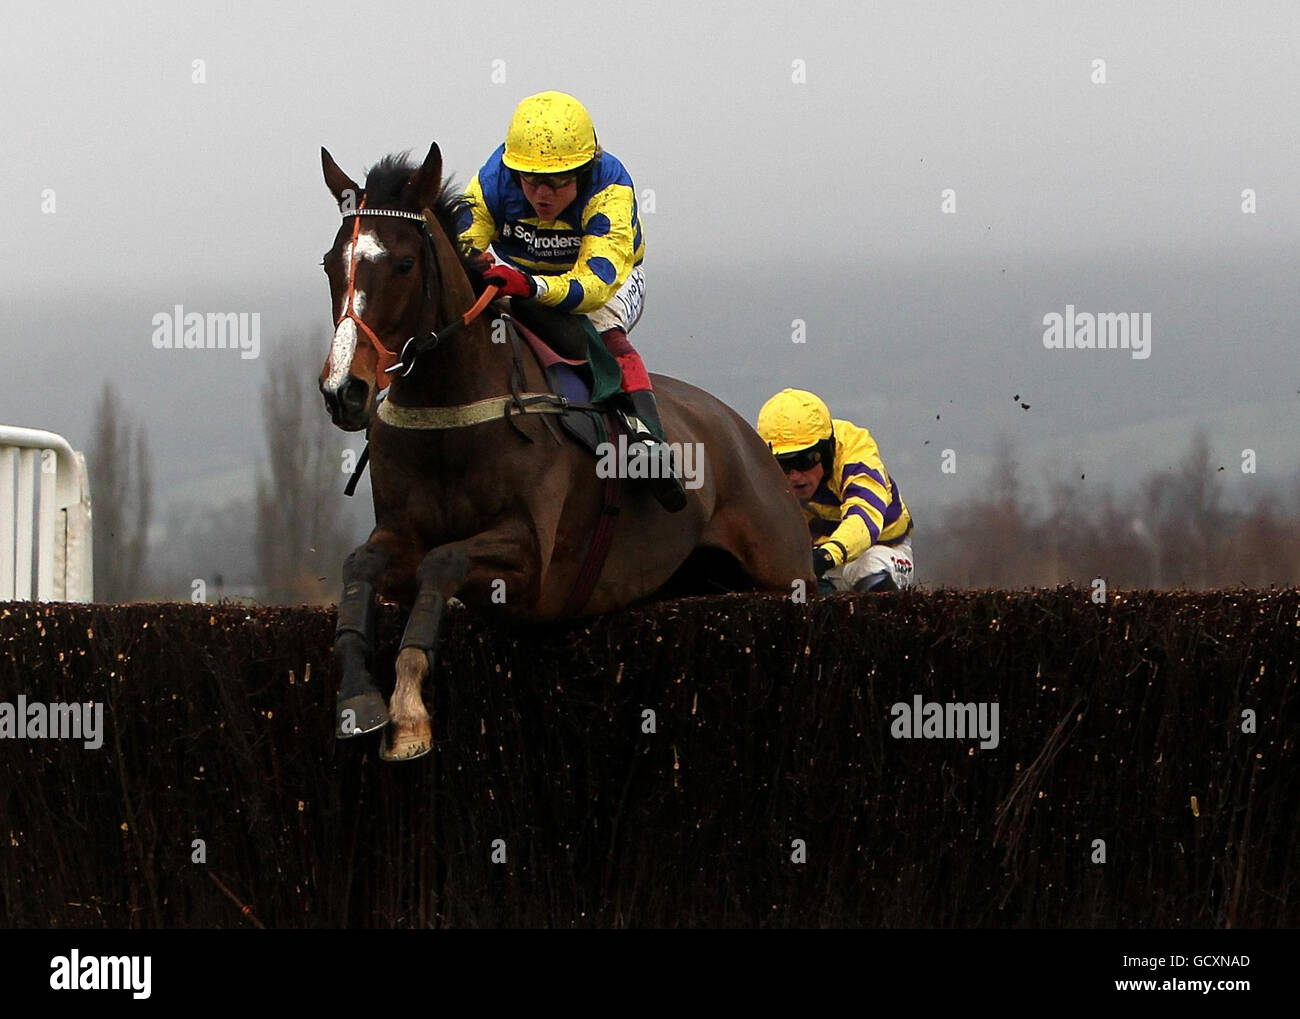 Blazing Bailey, ridden by Robert Thornton, jumps the last on their way to victory in the Raceodds Handicap Chase during the New Year's Day at Cheltenham Racecourse, Gloucestershire. Stock Photo